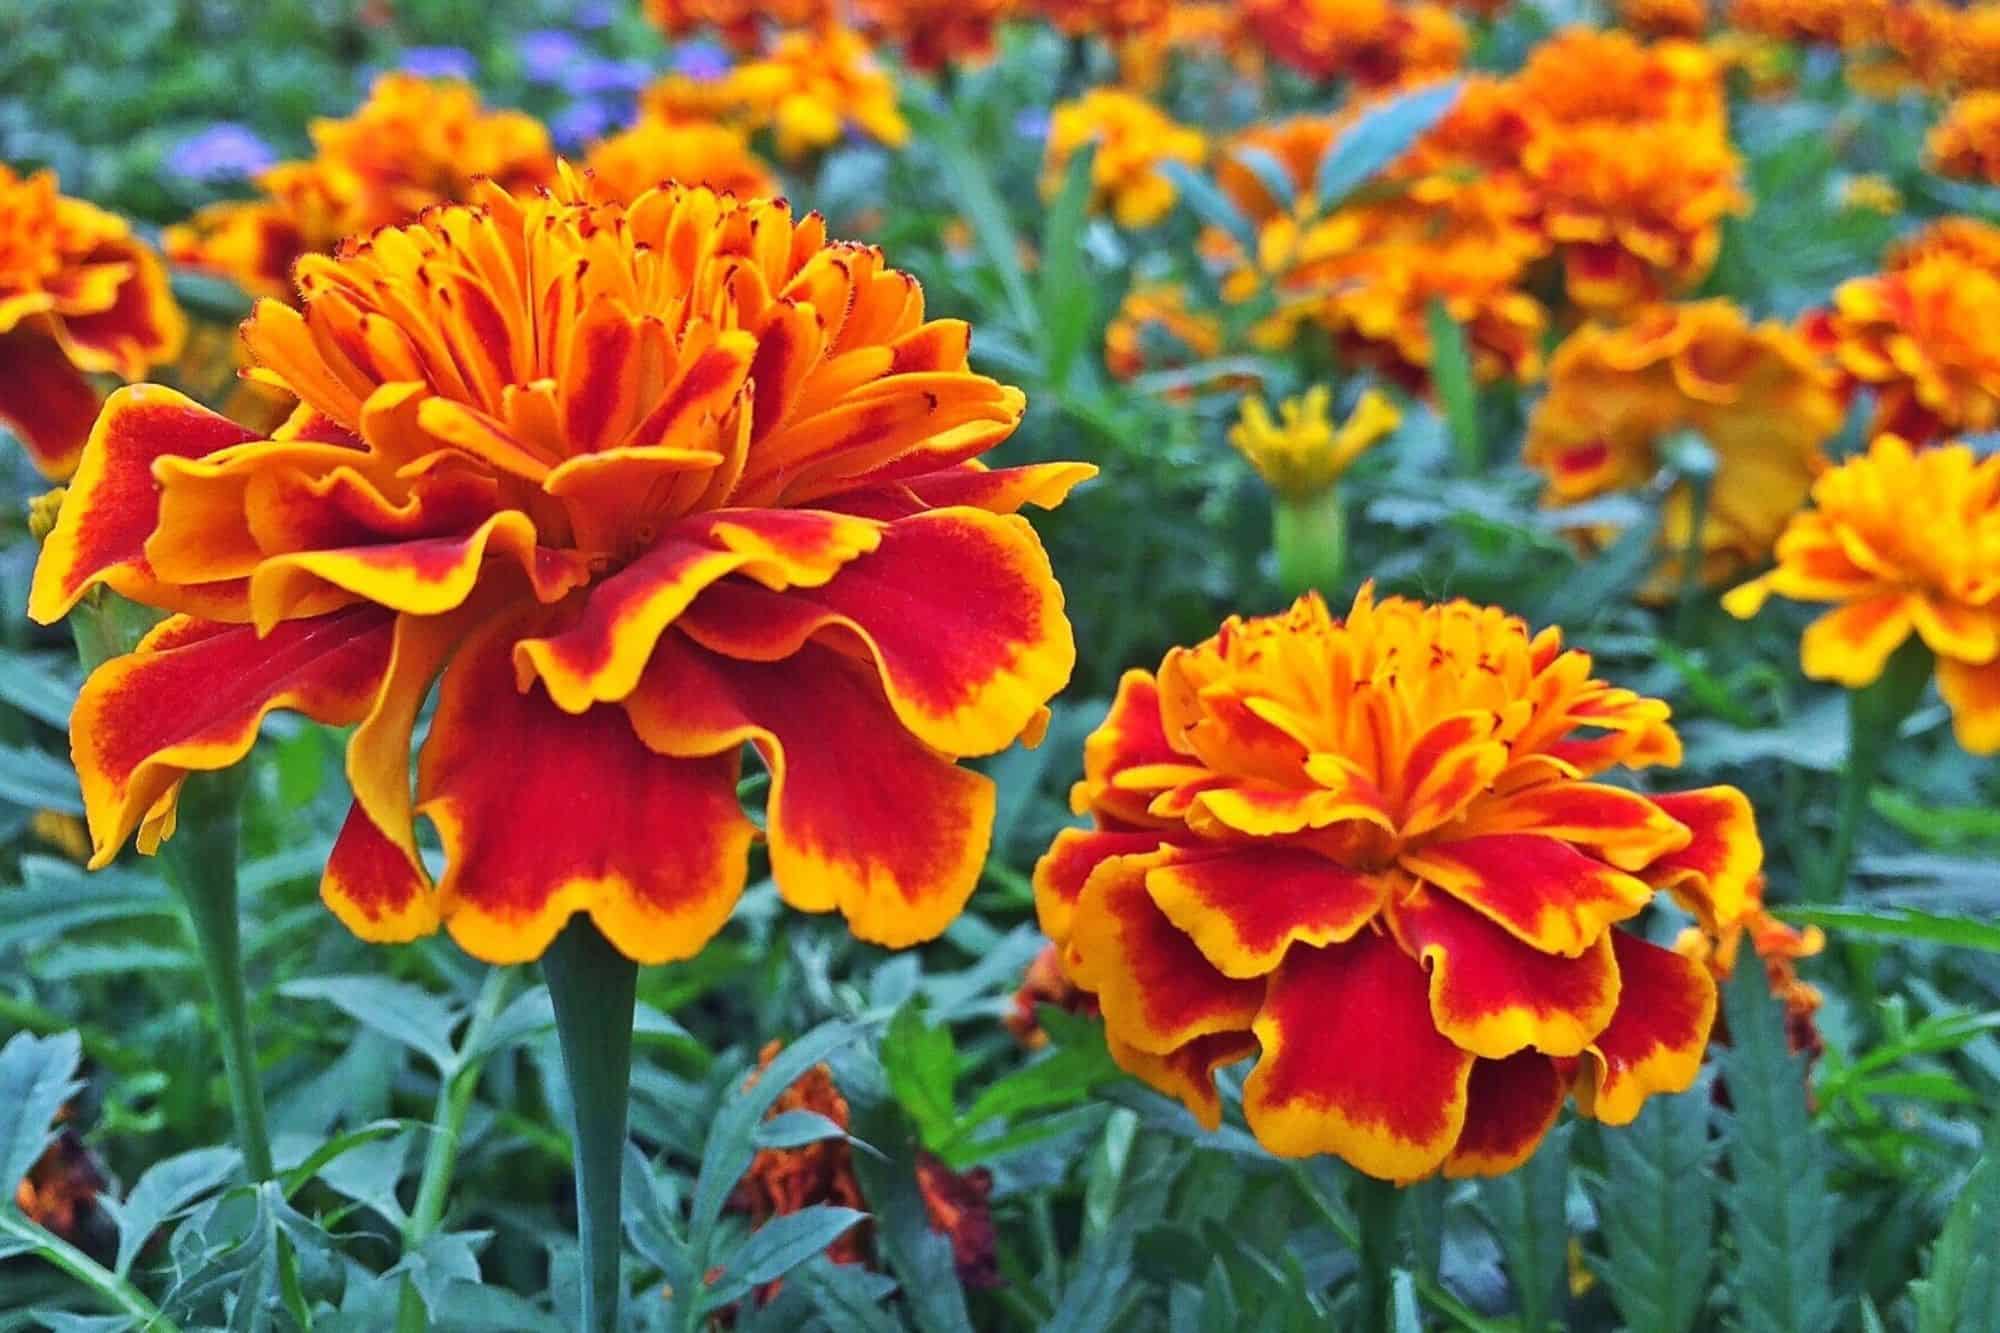 Bright orange and red marigolds amongst stems and leaves.